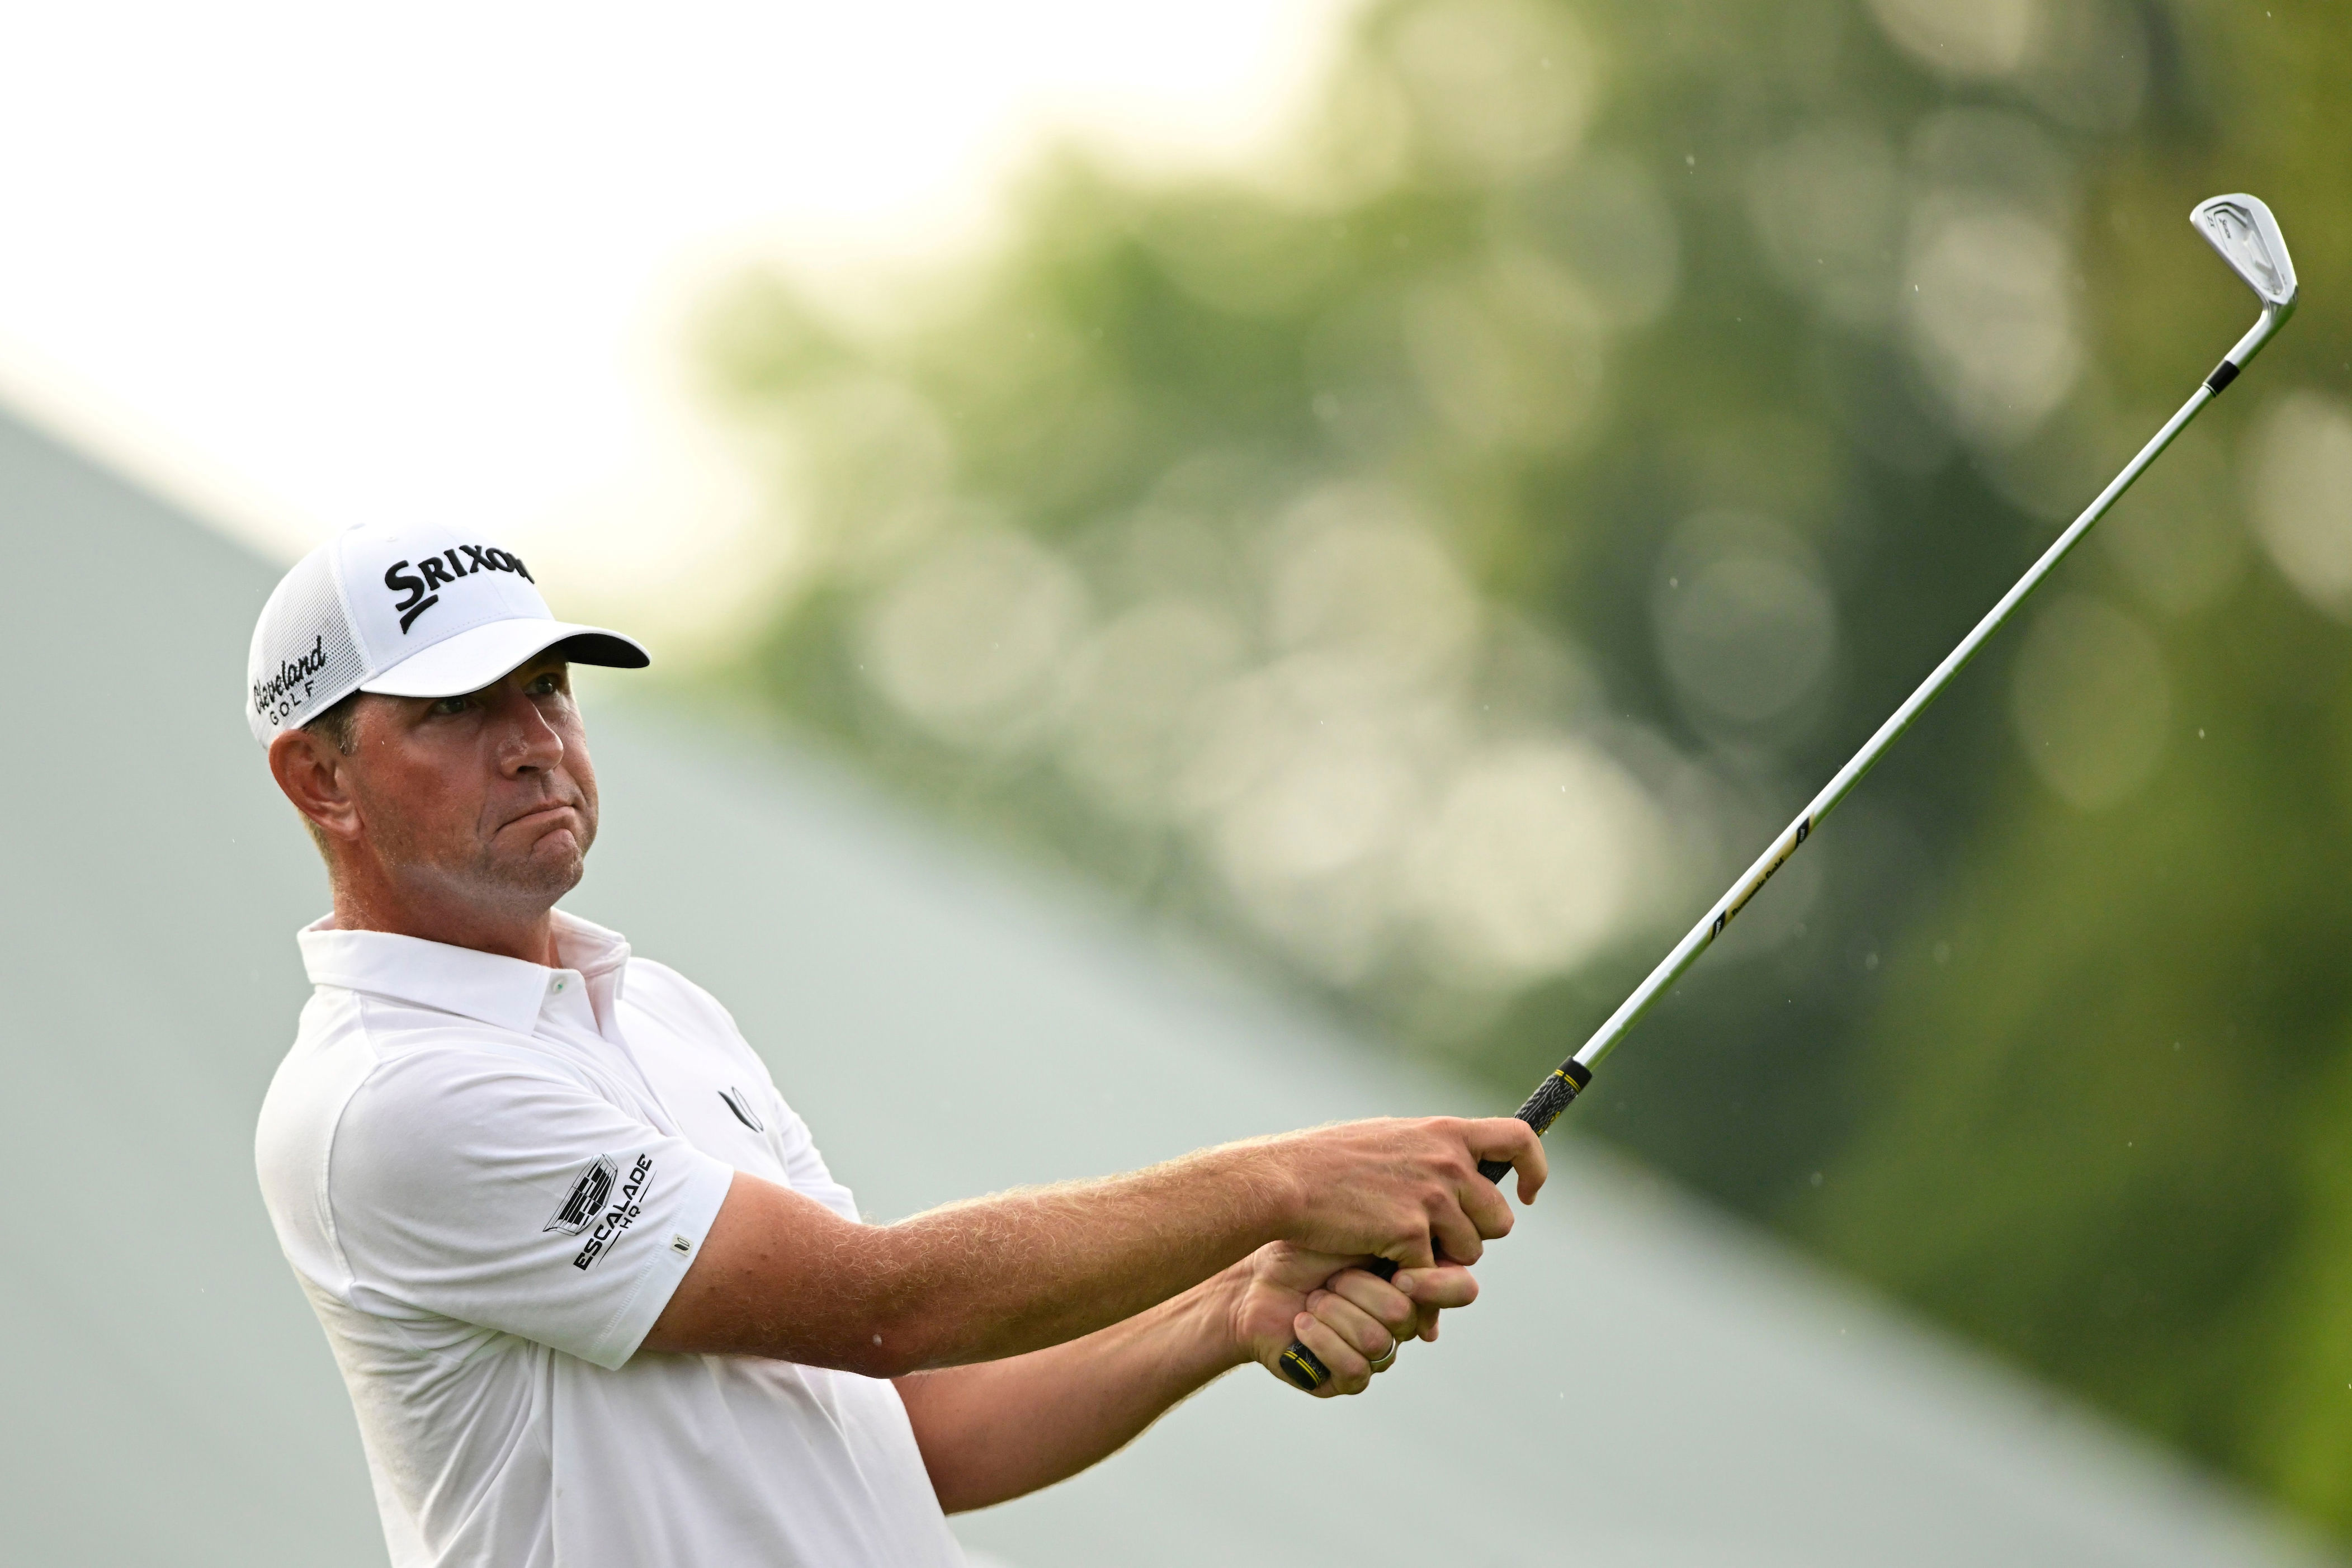 After rain delay, Lucas Glover pours it on to win PGA’s Wyndham